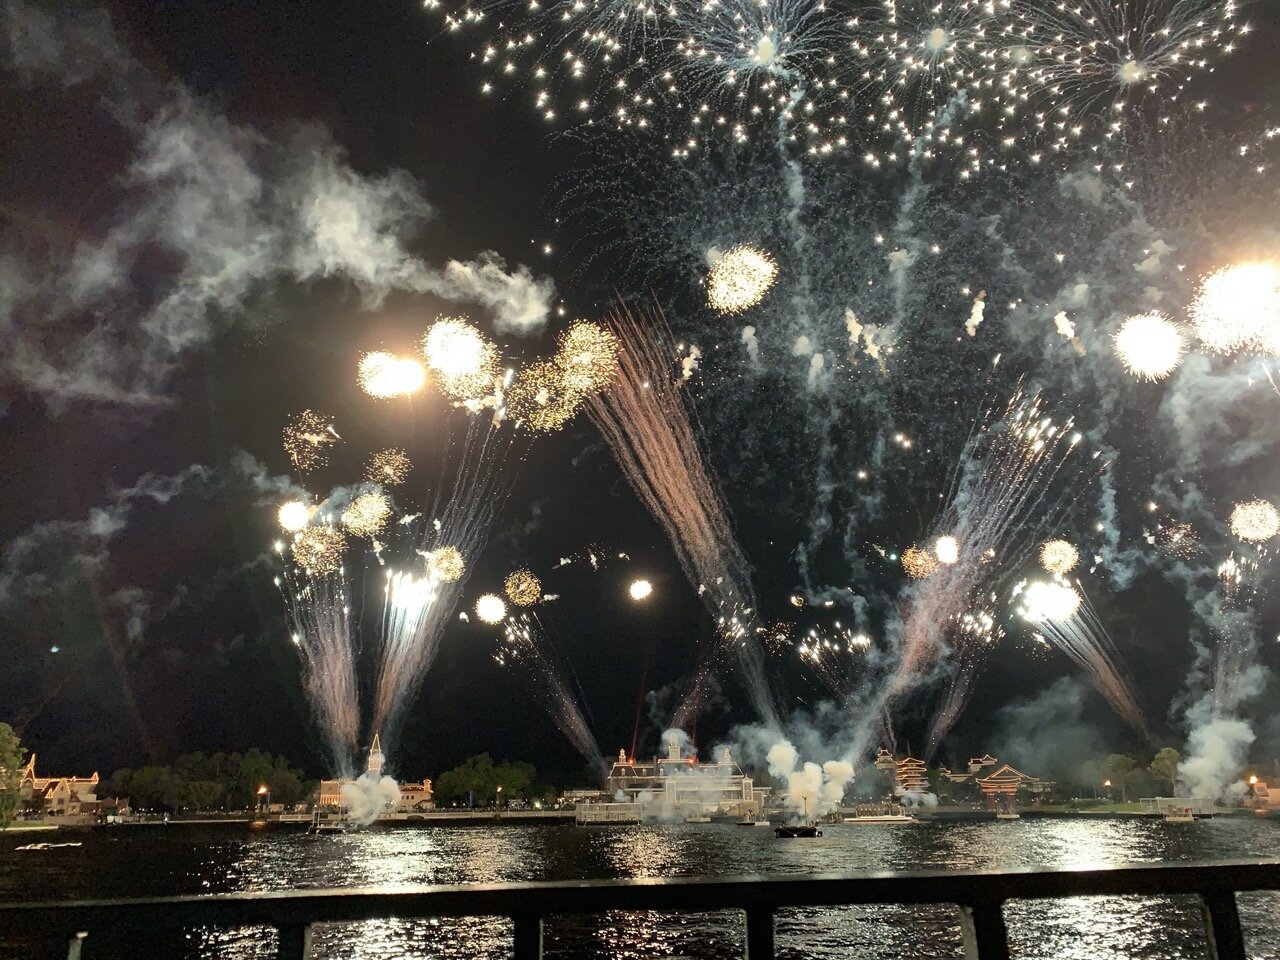 frozen ever after dessert party epcot our view 05.jpeg